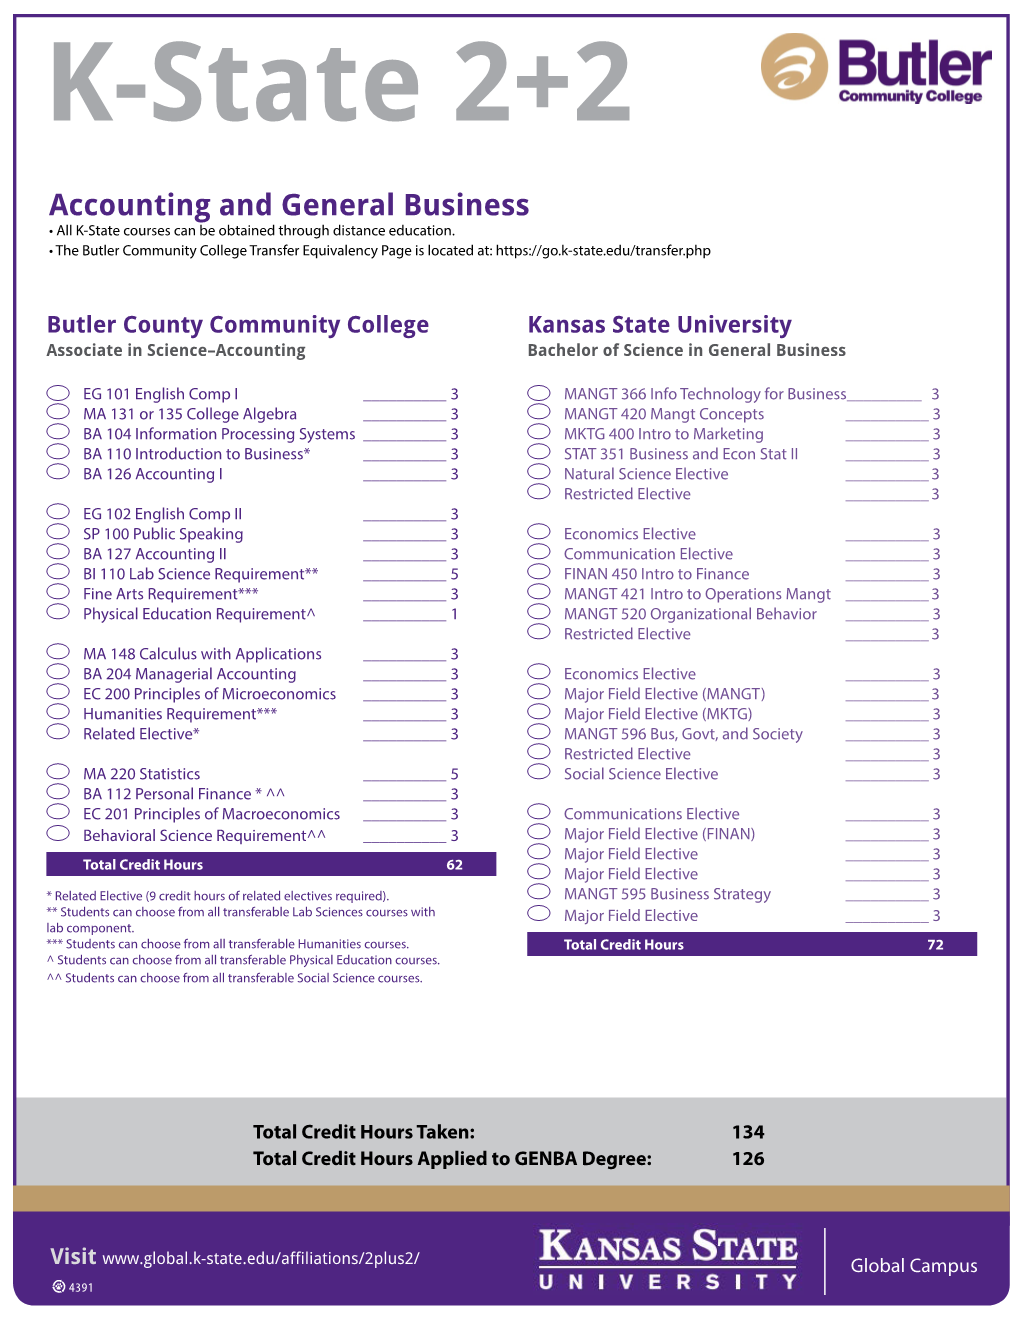 Accounting and General Business Program